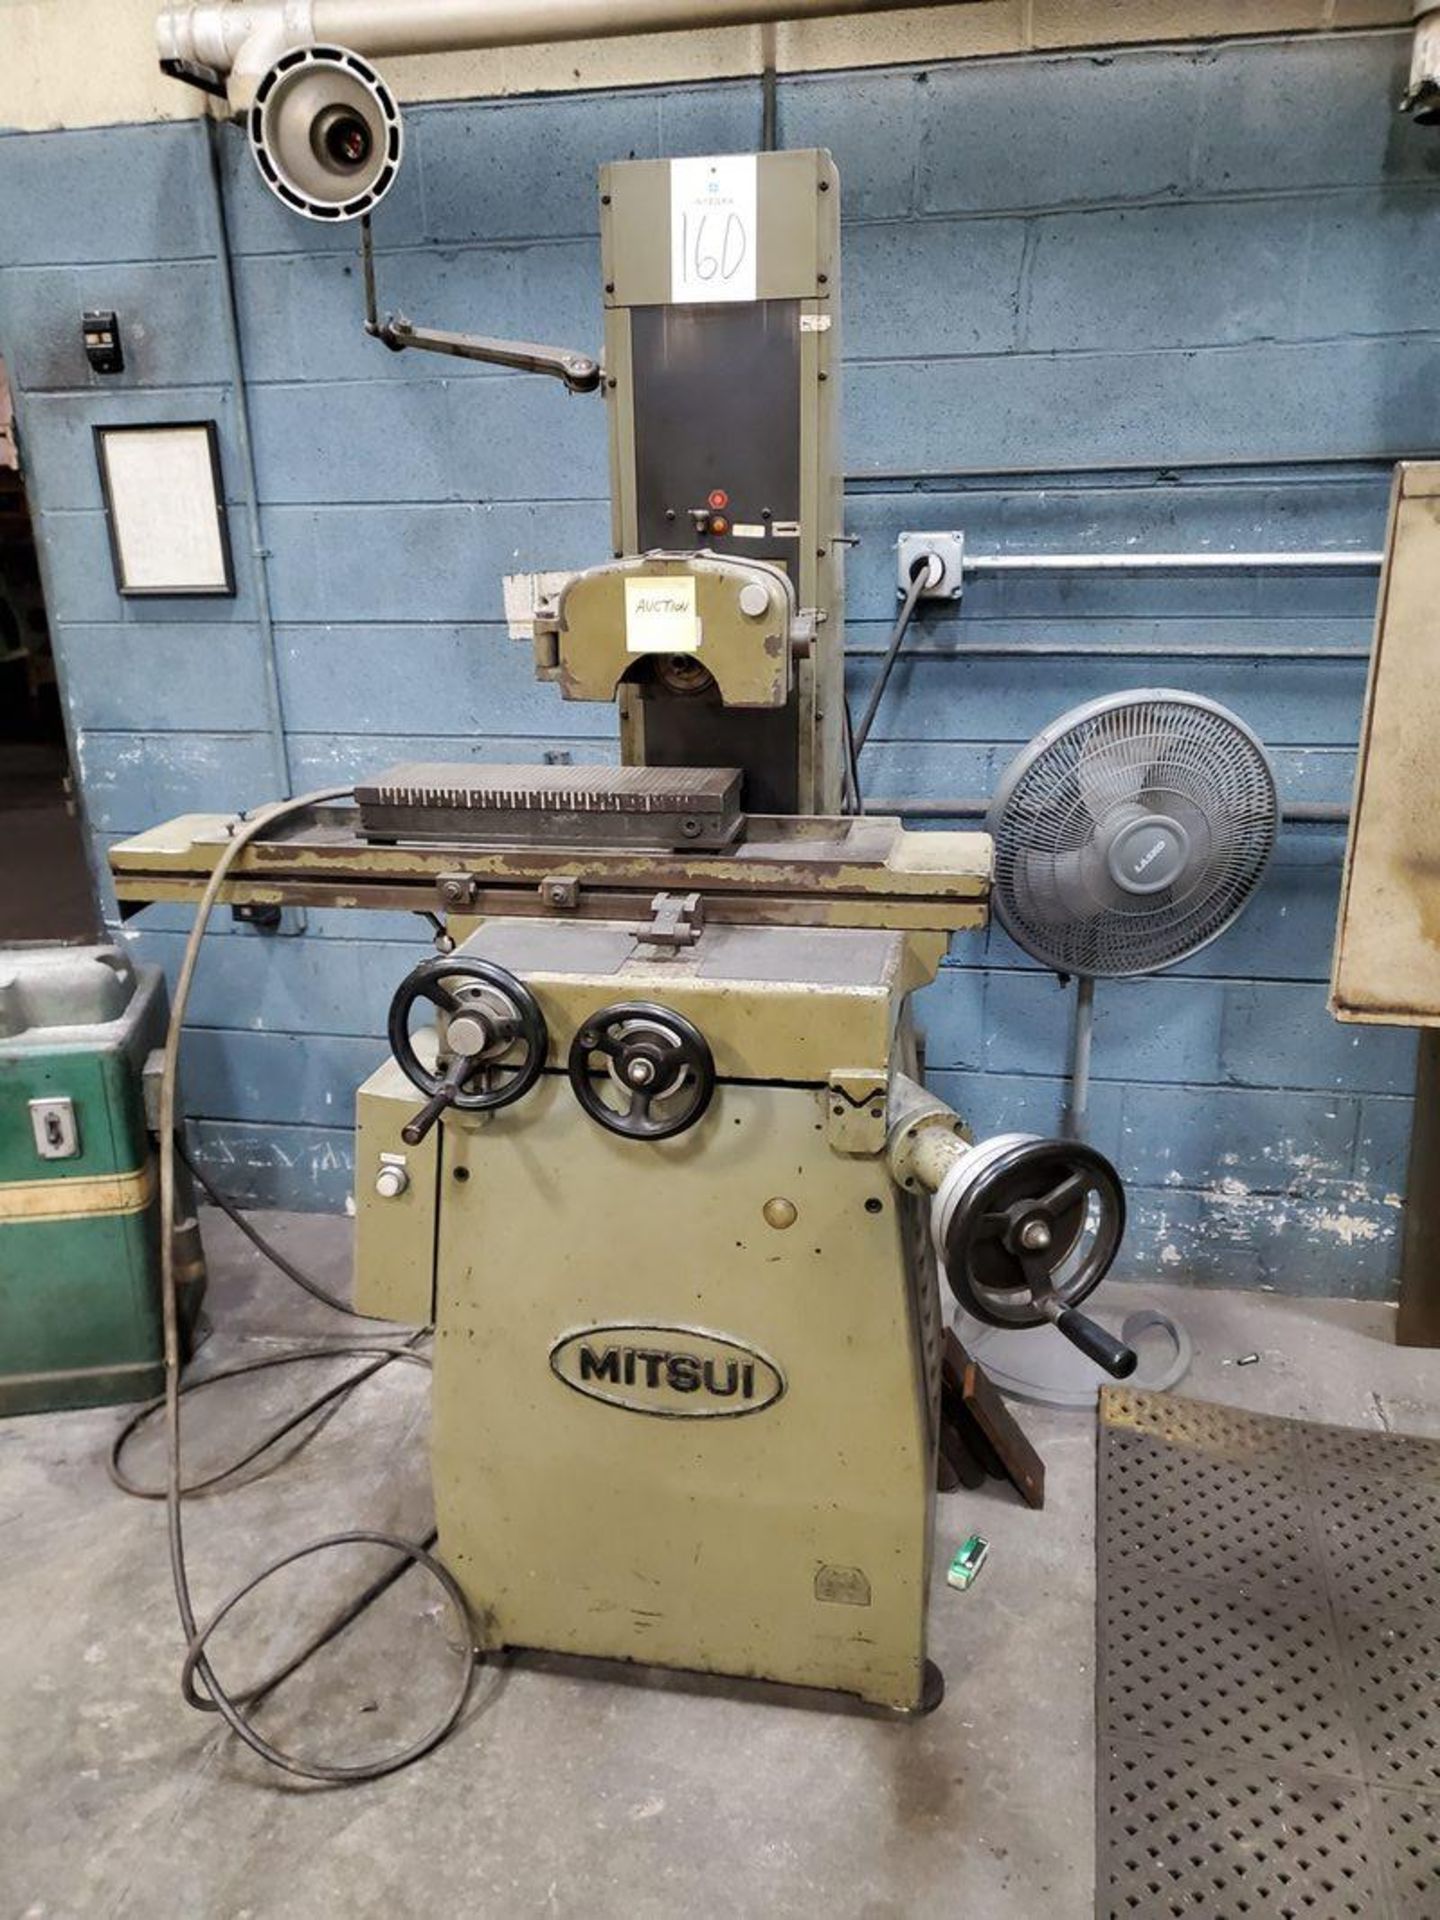 Mitsui MSG-200MH 6" x 12" Hand Surface Grinder, S/N 80012448 - Image 2 of 3